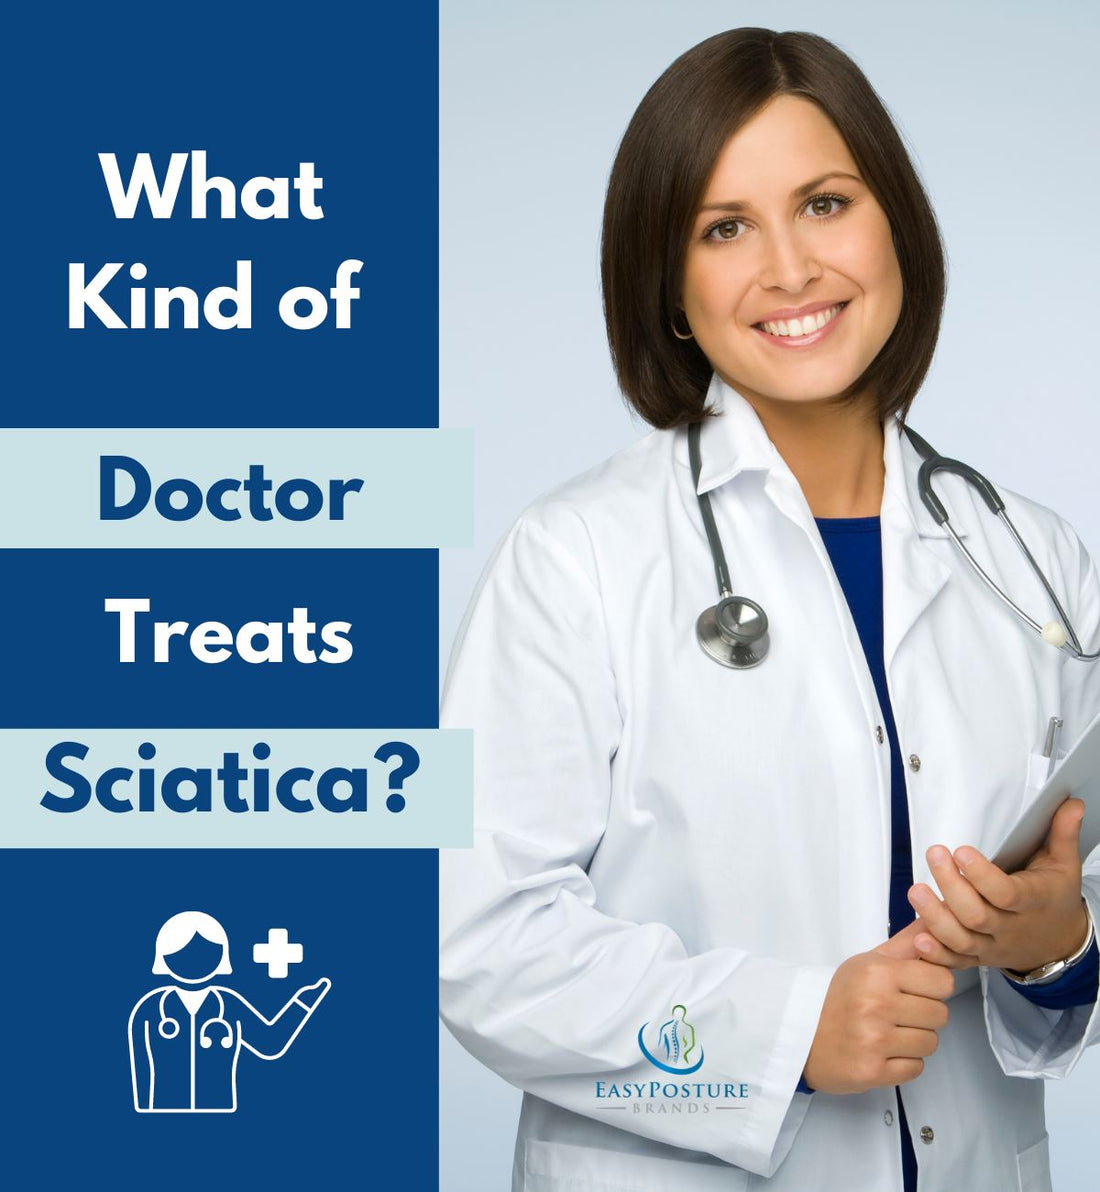 What Kind of Doctor Treats Sciatica? Here's What You Need to Know